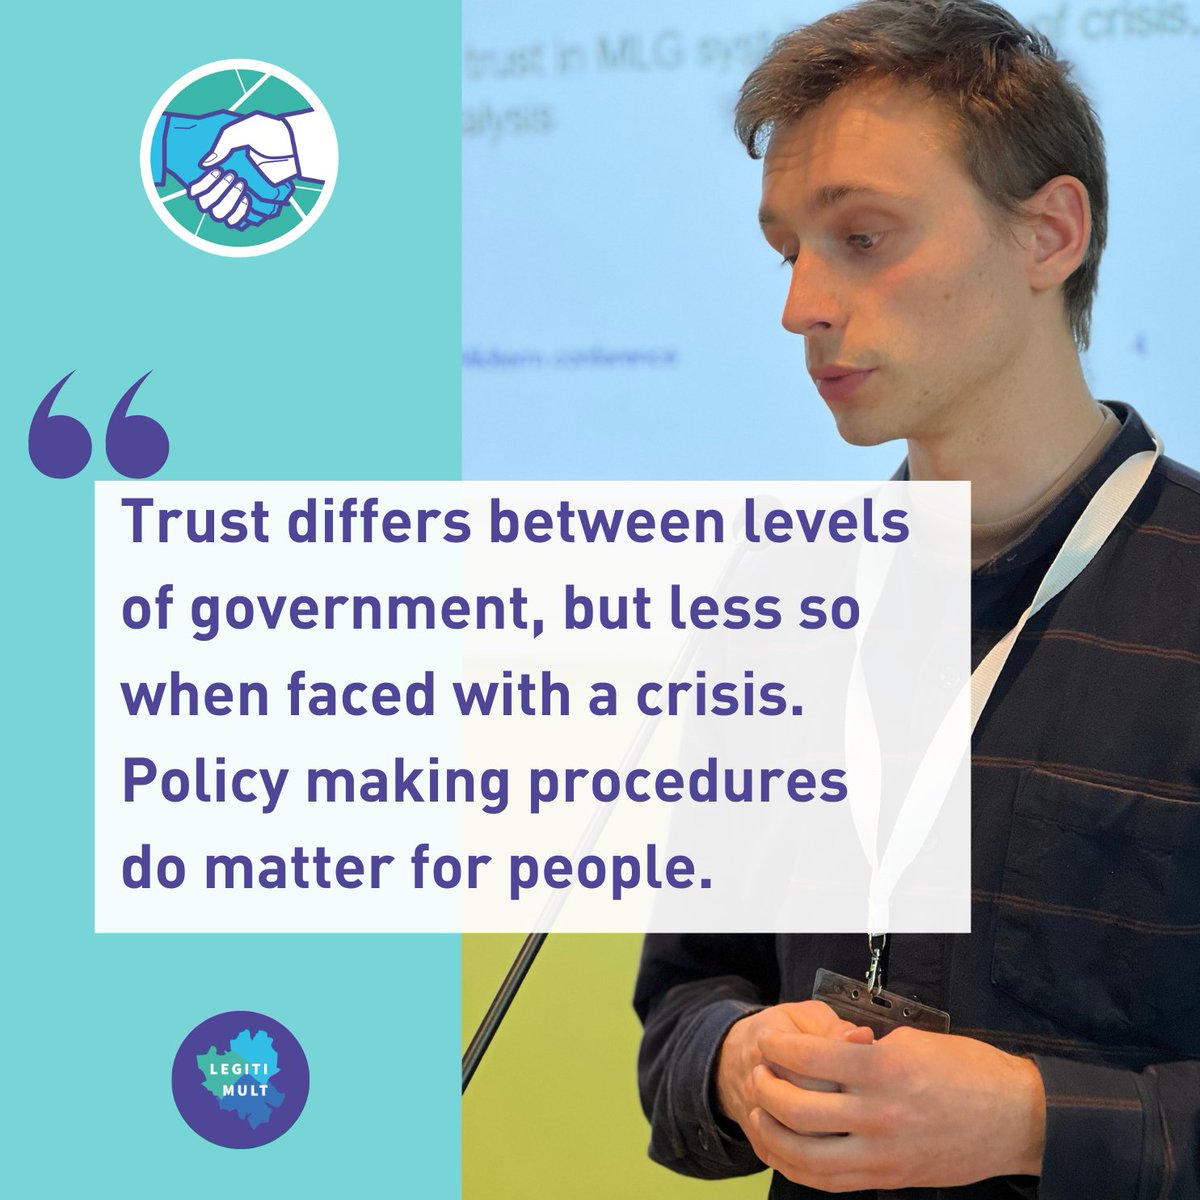 Political #Trust in times of crisis: @UAntwerpen team is looking at trust in their research. Their survey analysis shows how the national level becomes more important in terms of trust during a crisis for citizens, and particularly in unitary systems #LEGITIMULT